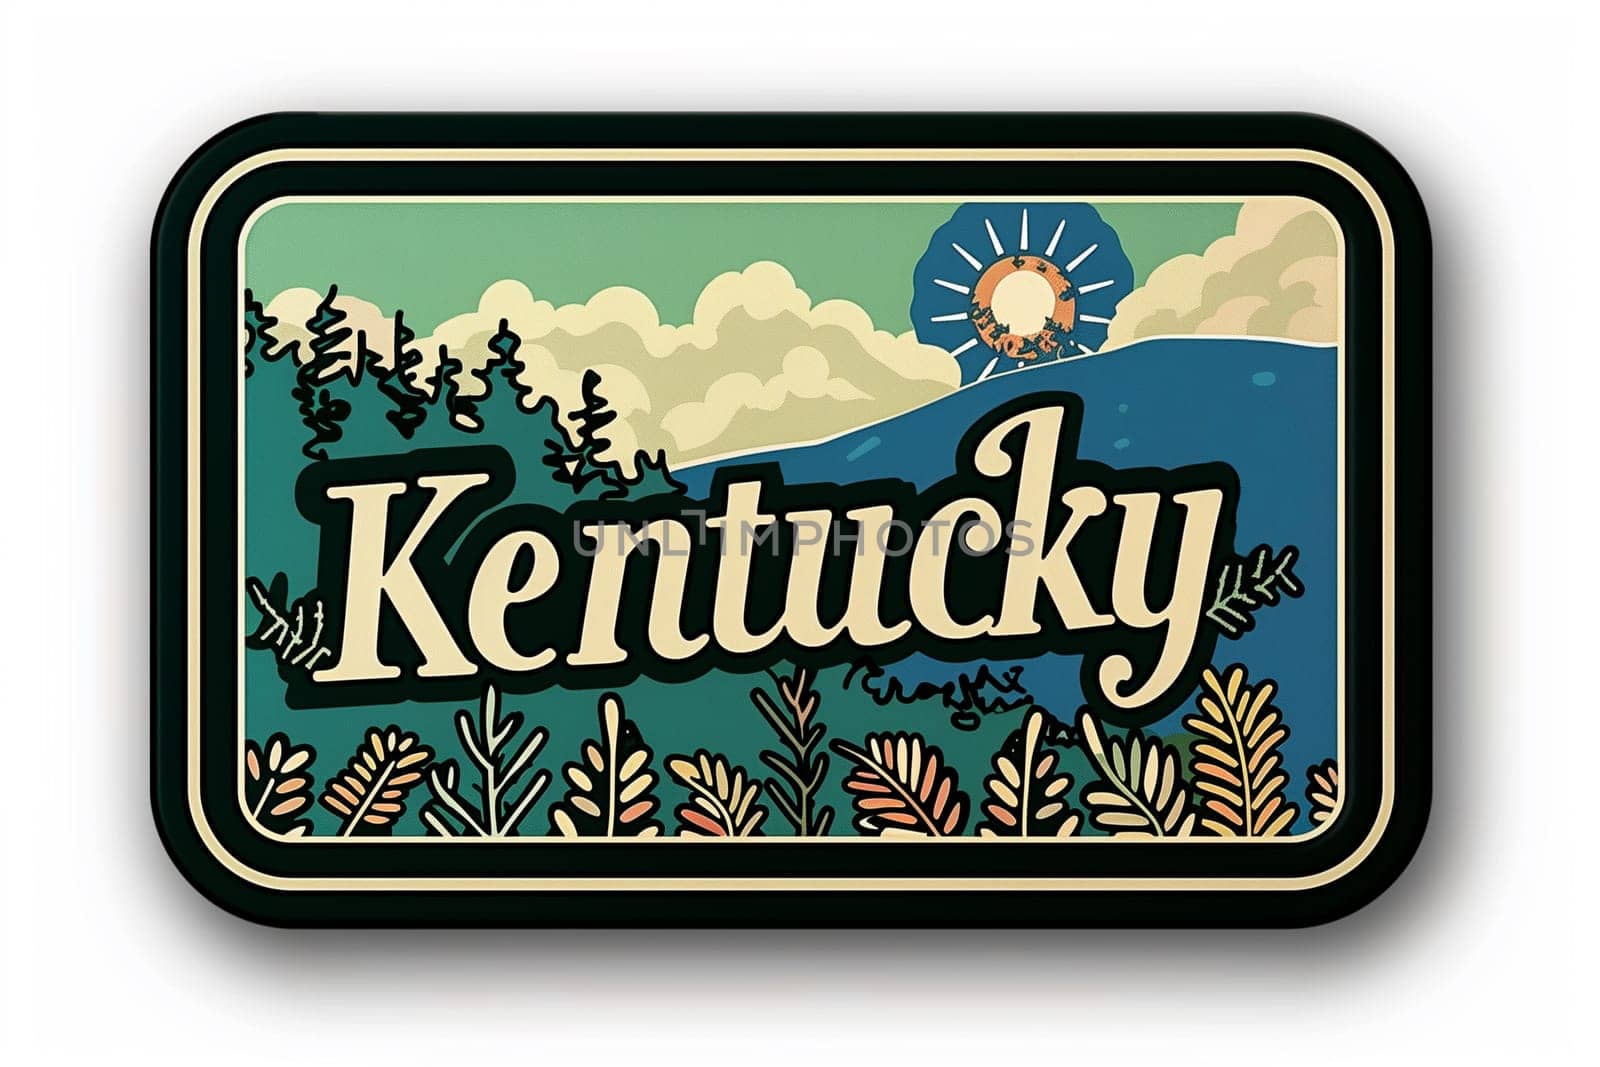 Kentucky Sign Displaying the Word Kentucky by Sd28DimoN_1976